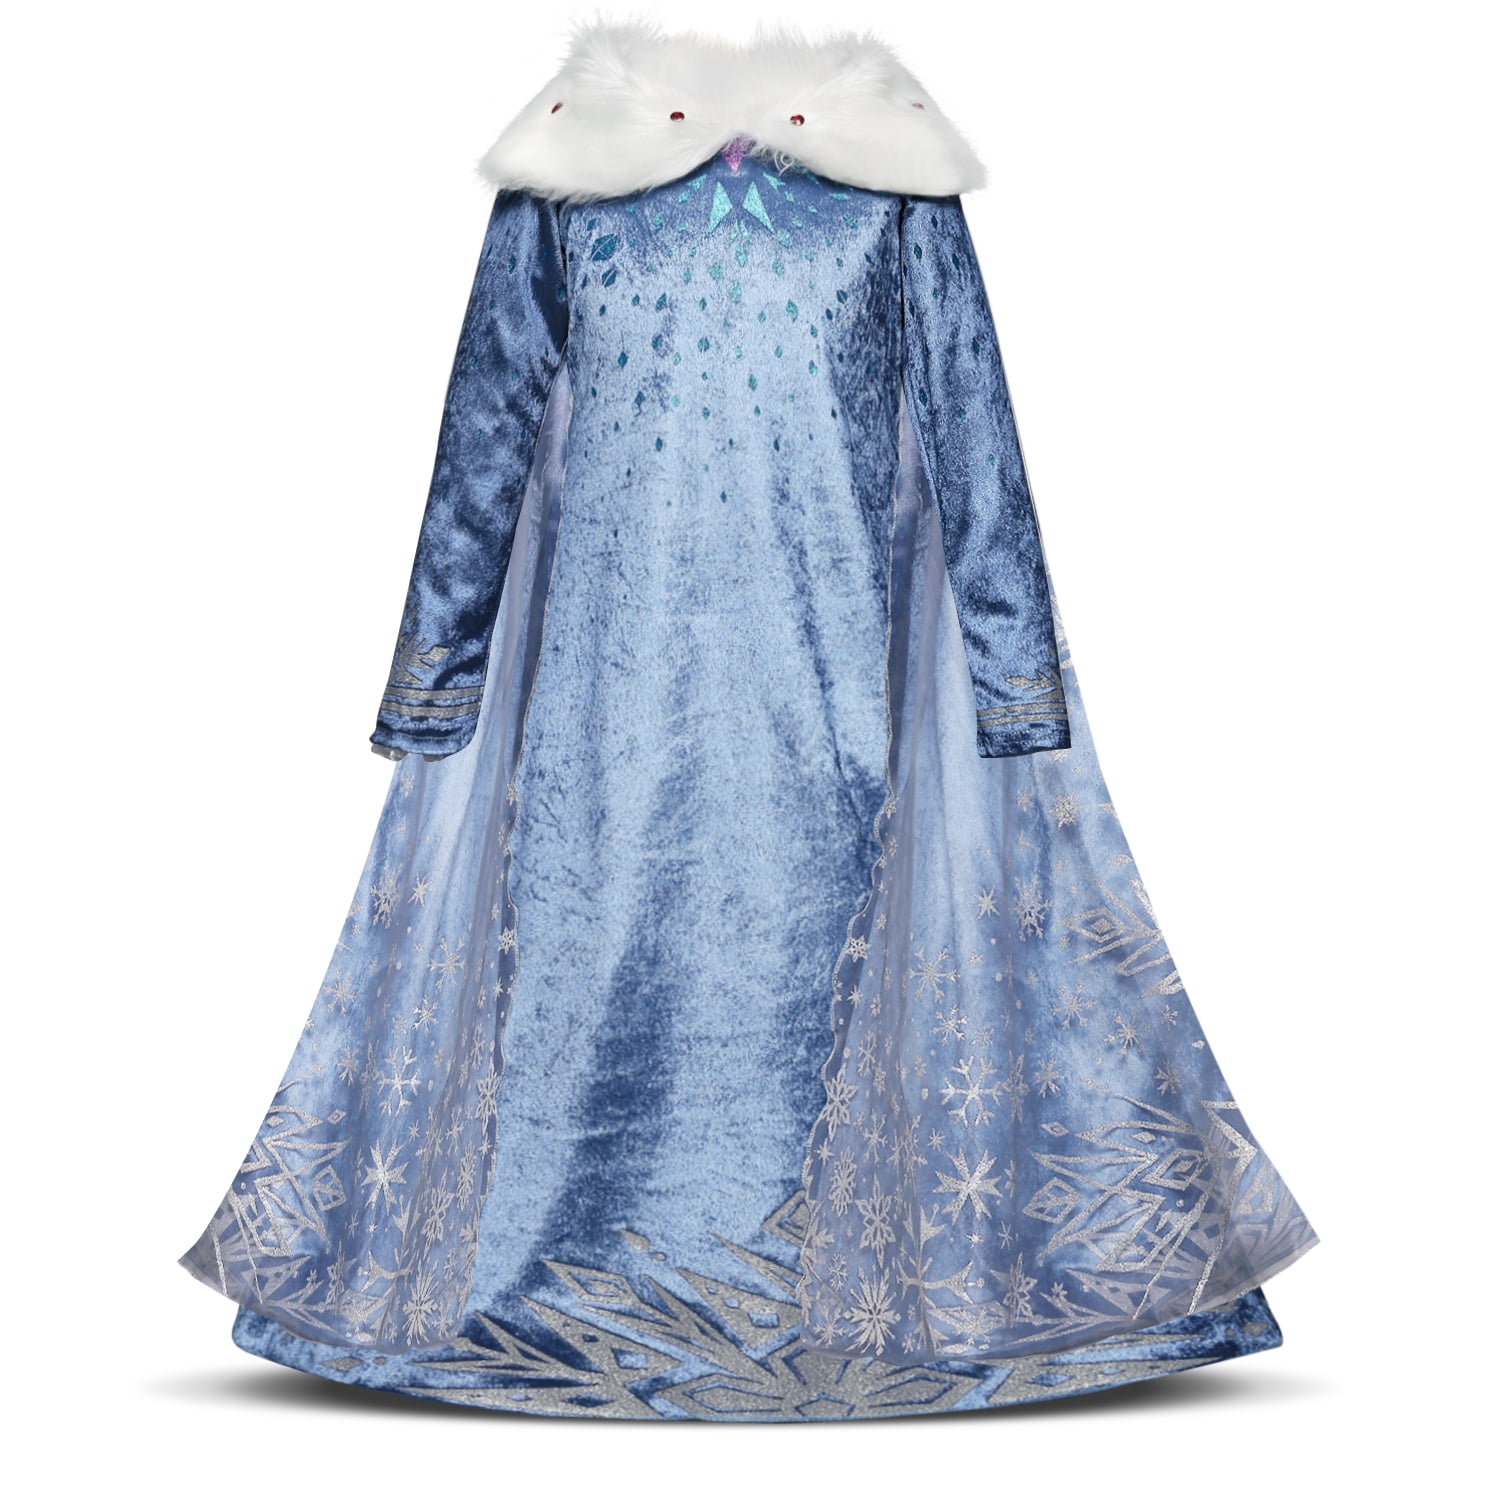 Kids Princess Elsa Anna Dresses for Girls Unicorn Cosplay Costume Party Clothing 